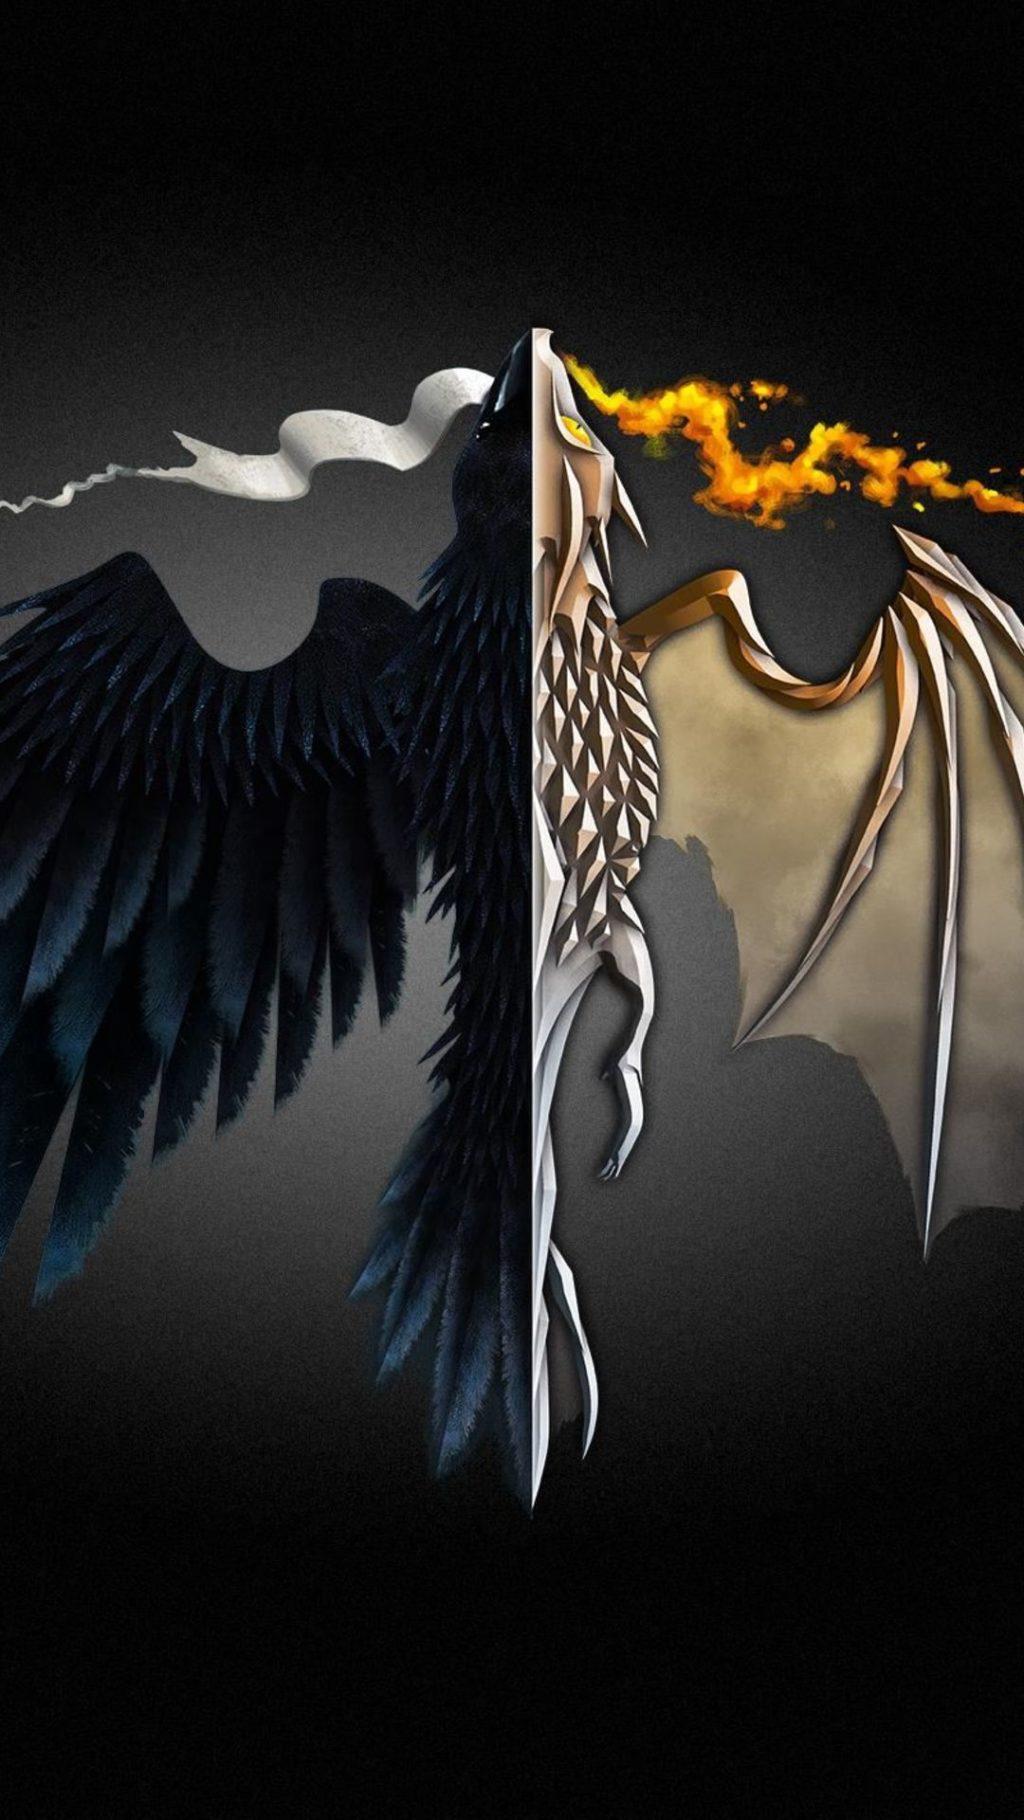 Cool Game of Thrones Wallpaper for iPhone and iPad